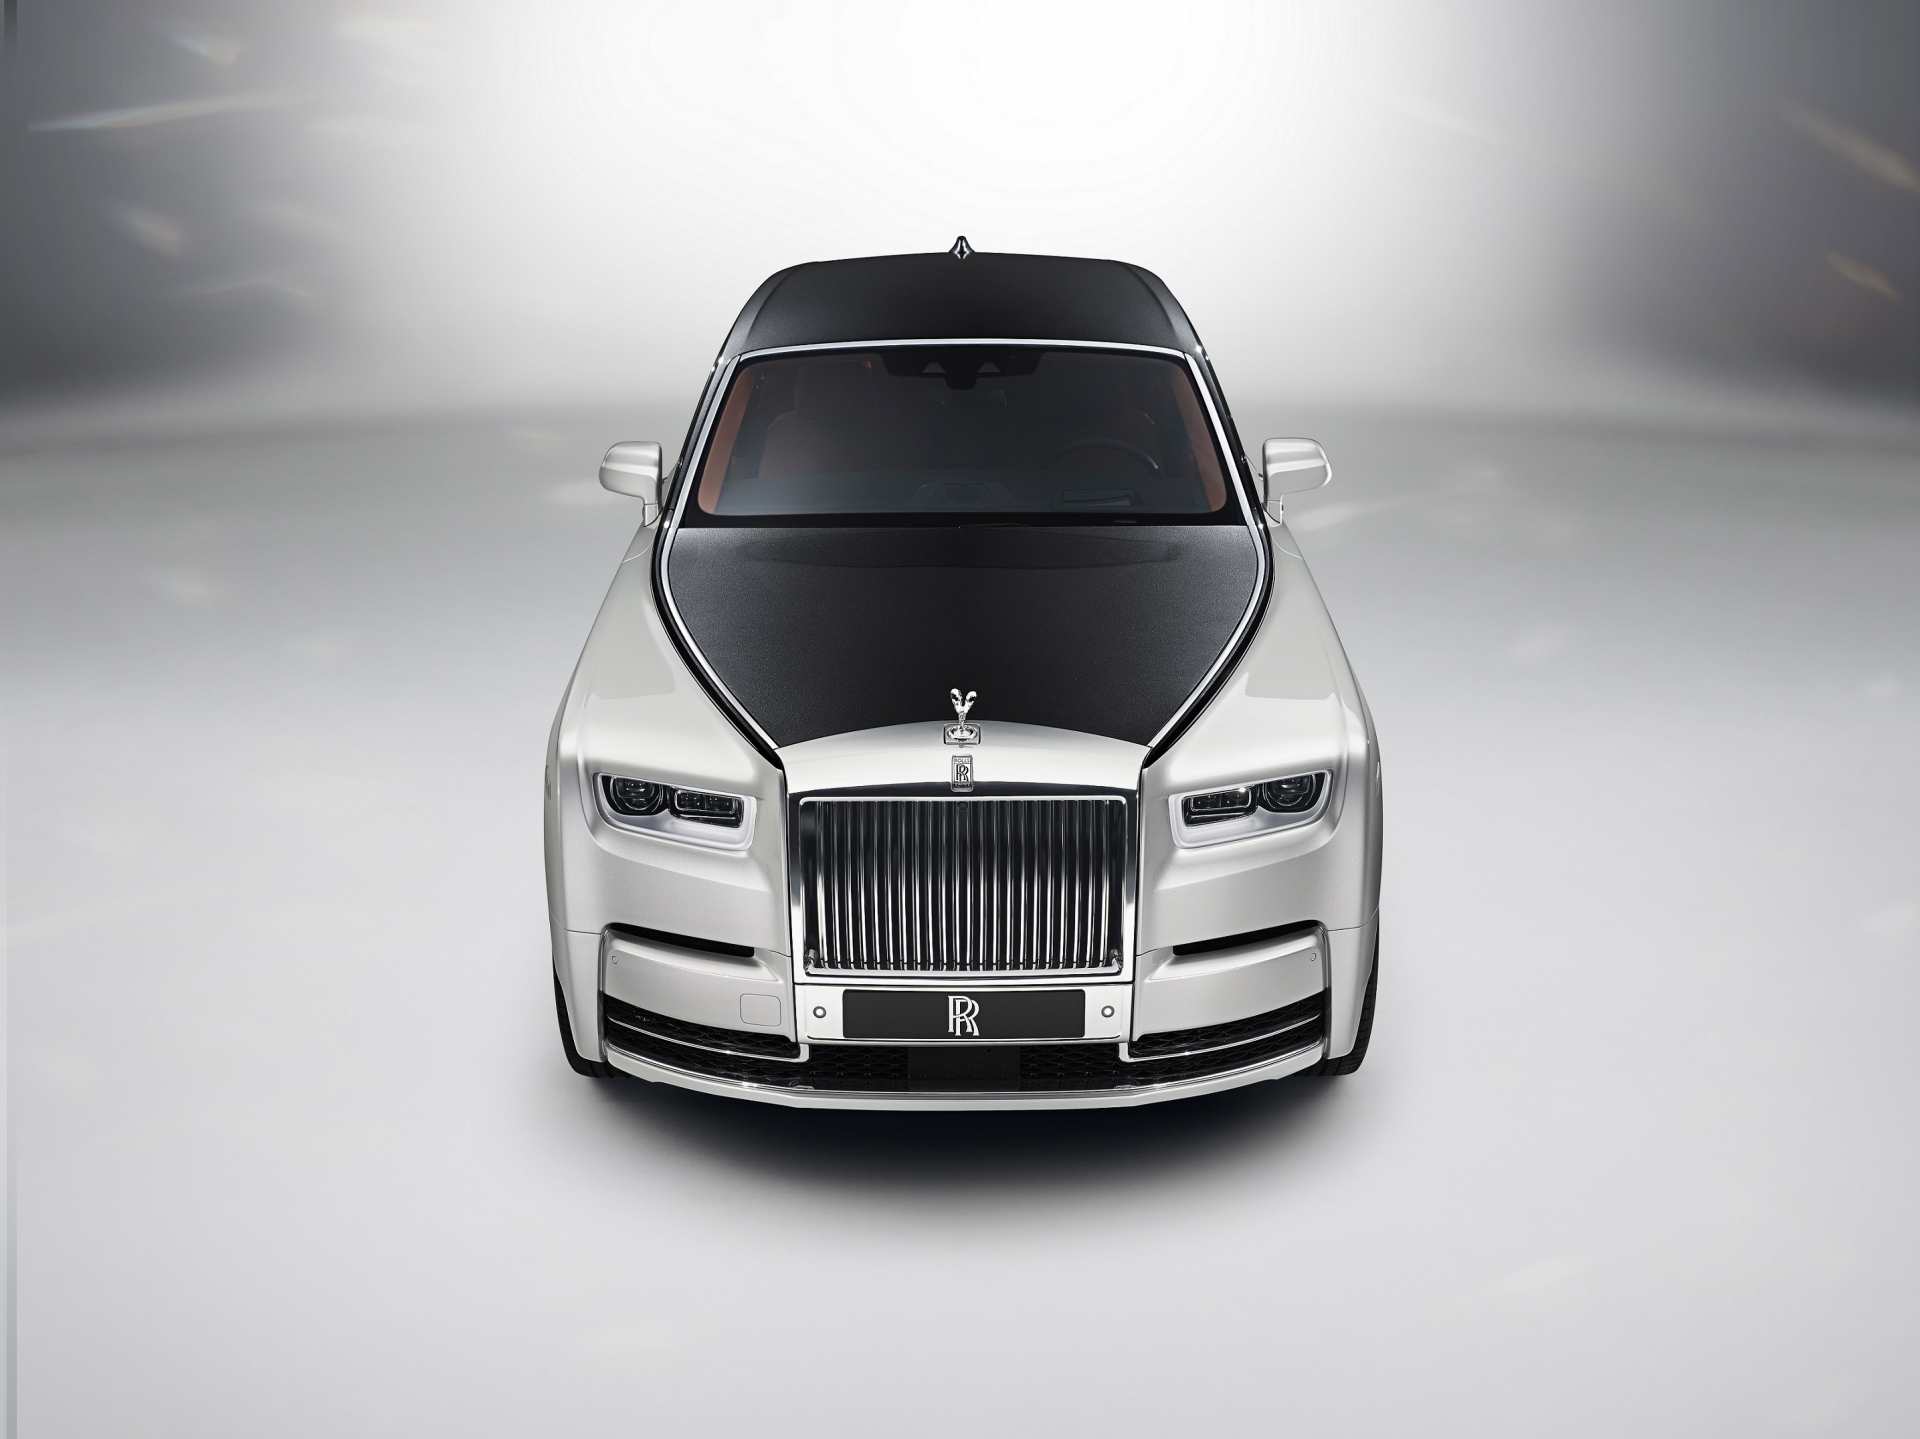 2018 Rolls-Royce Phantom VII - Silver And Grey Exterior - Front Overhead View